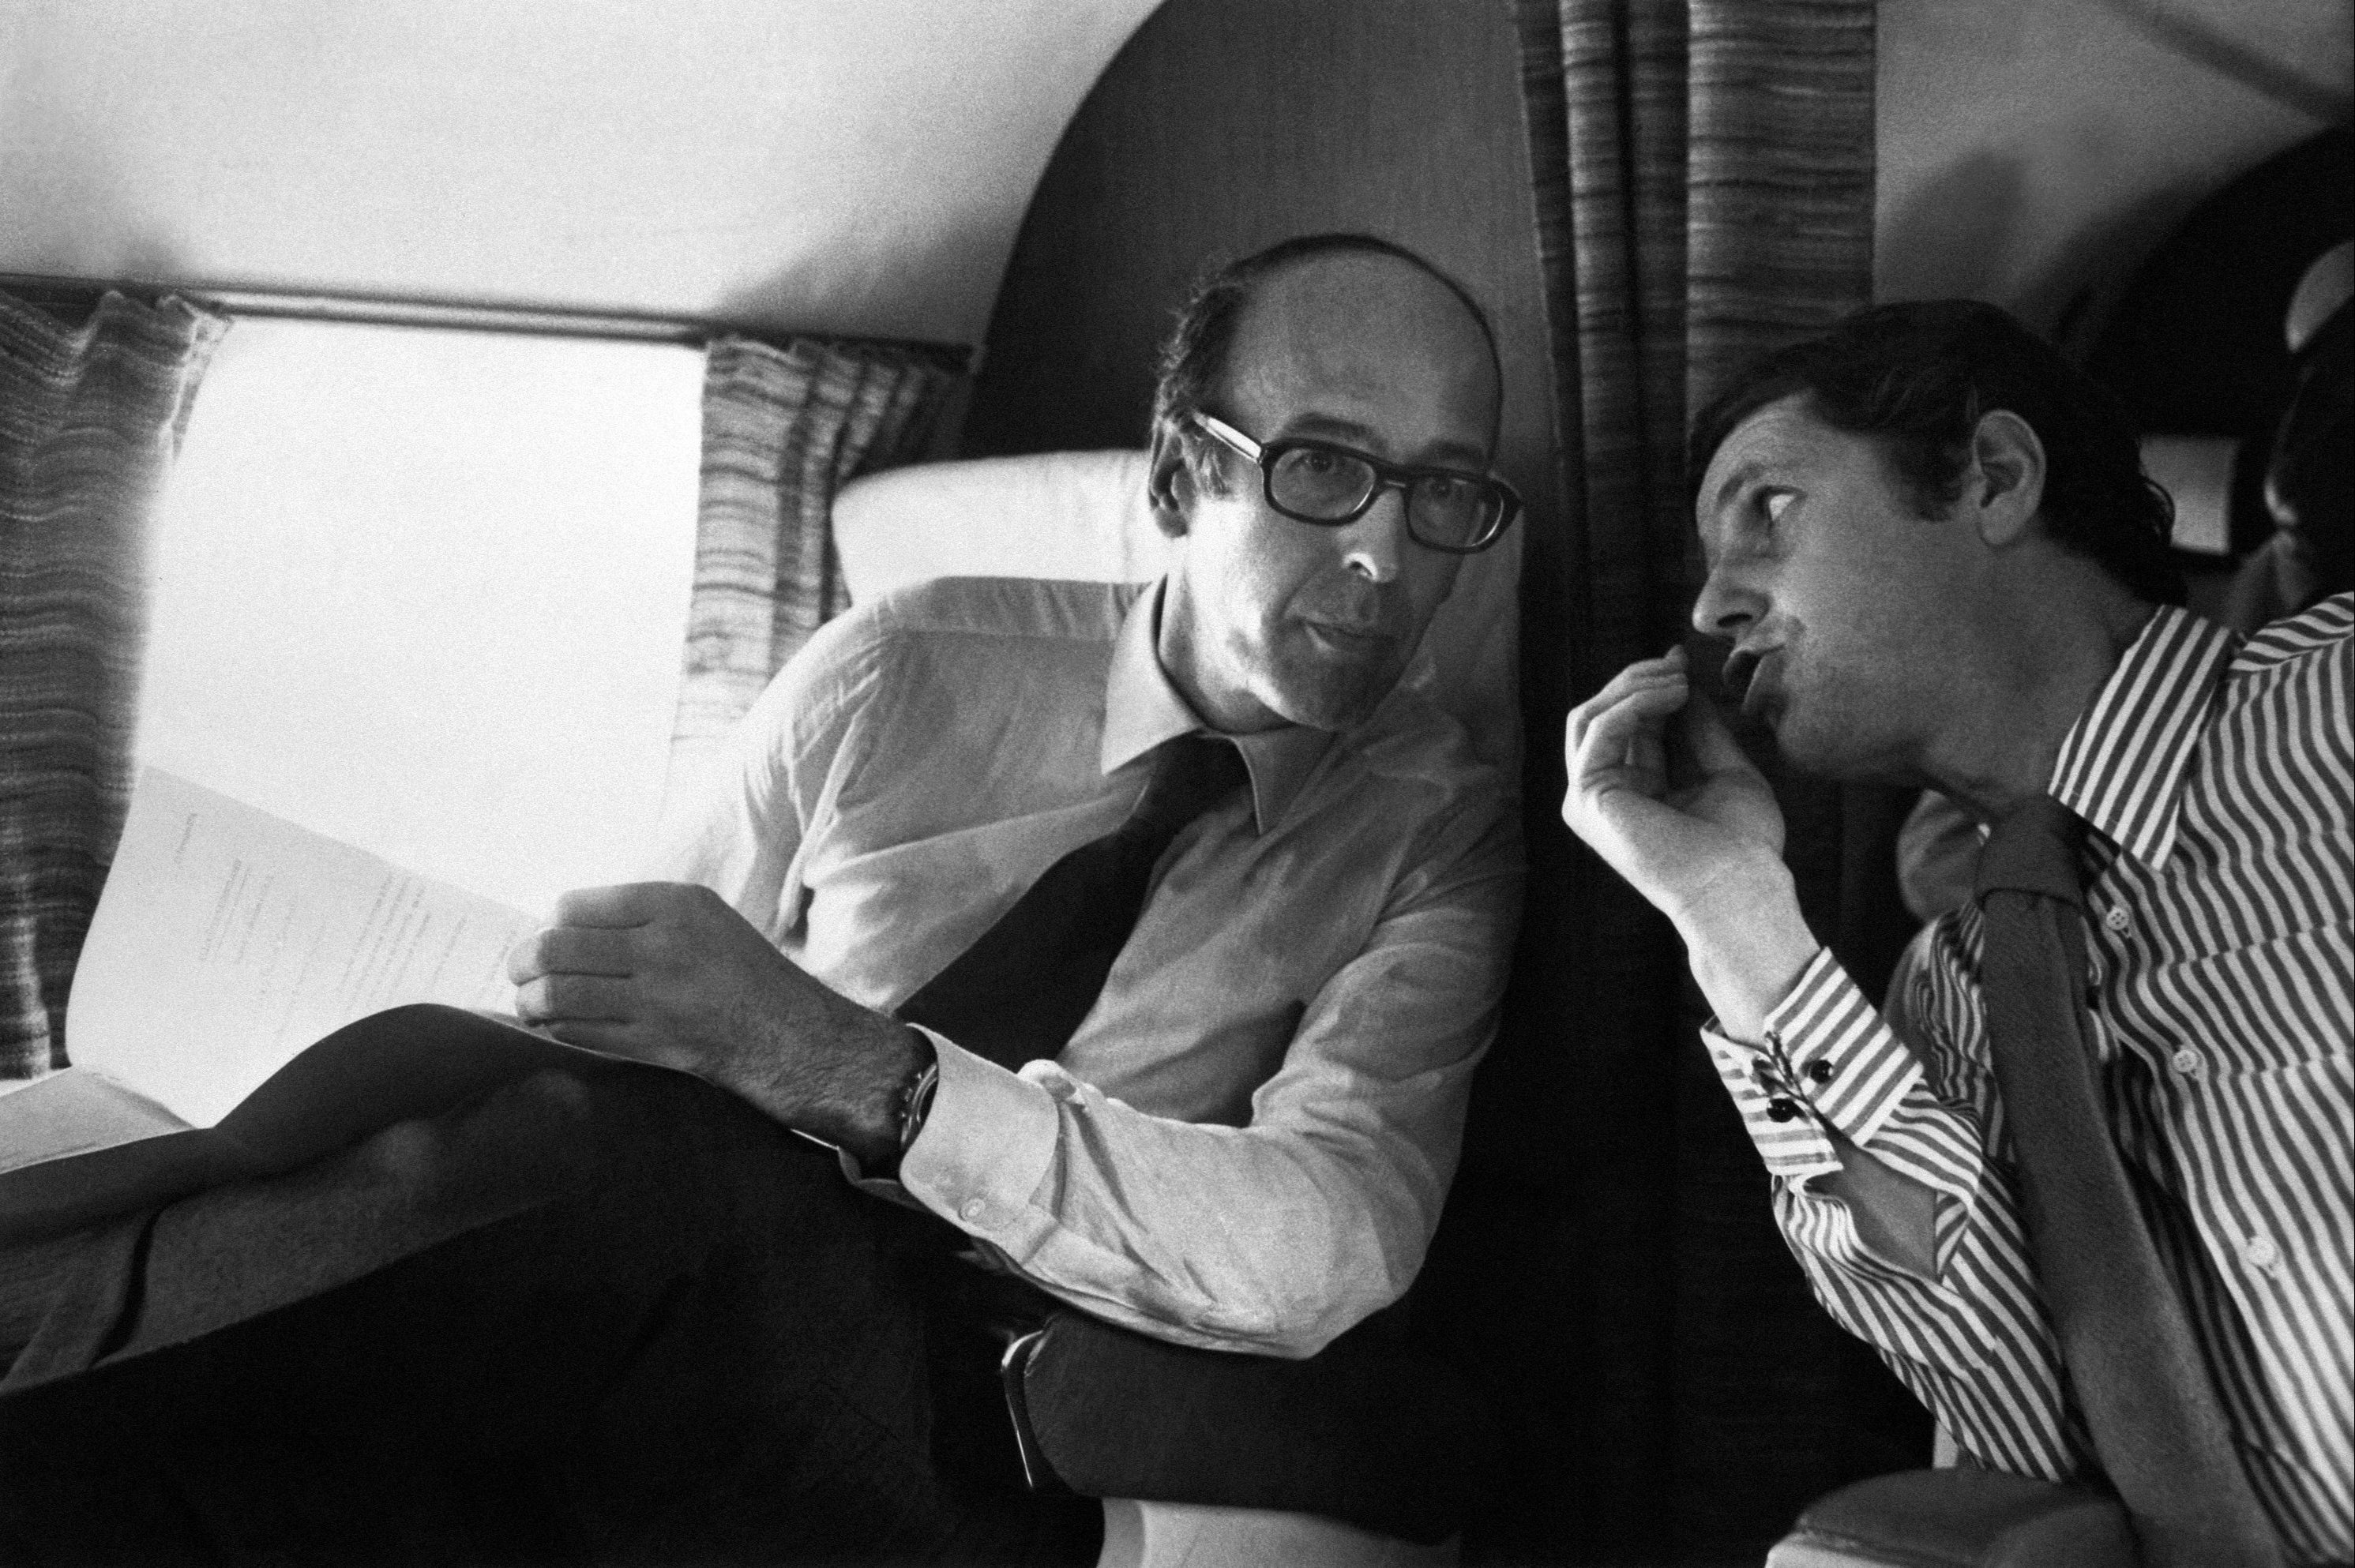 Giscard (left) talks to Olivier Stirn on a plane in 1974